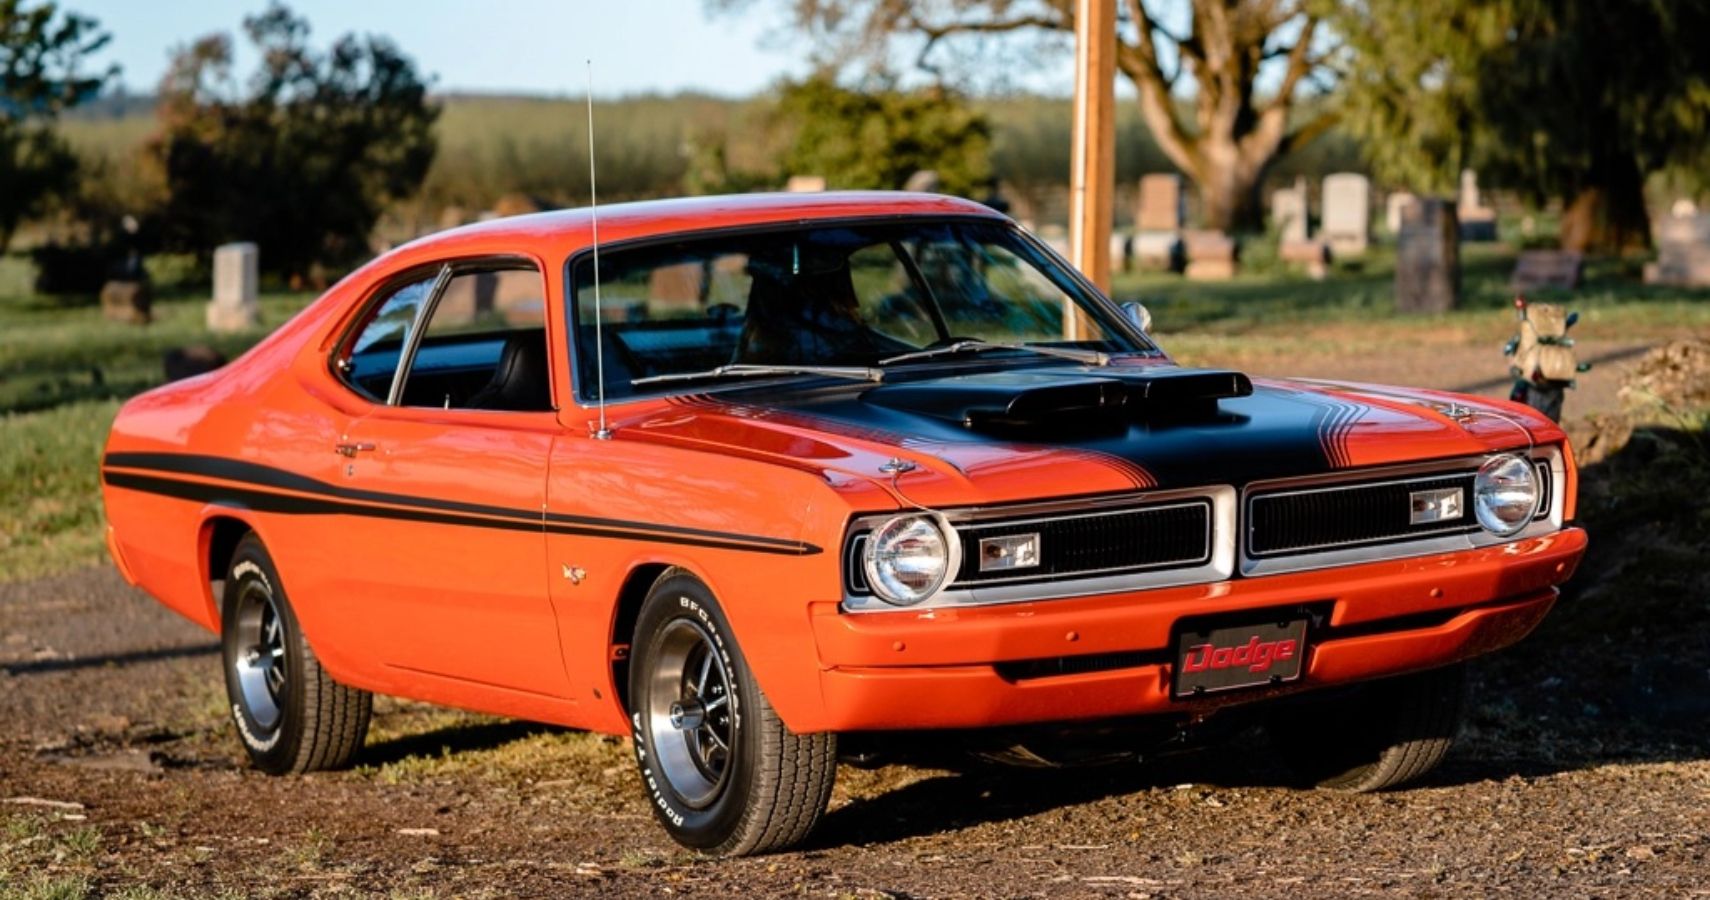 10 Things Only True Gearheads Know About The Dodge Dart Demon